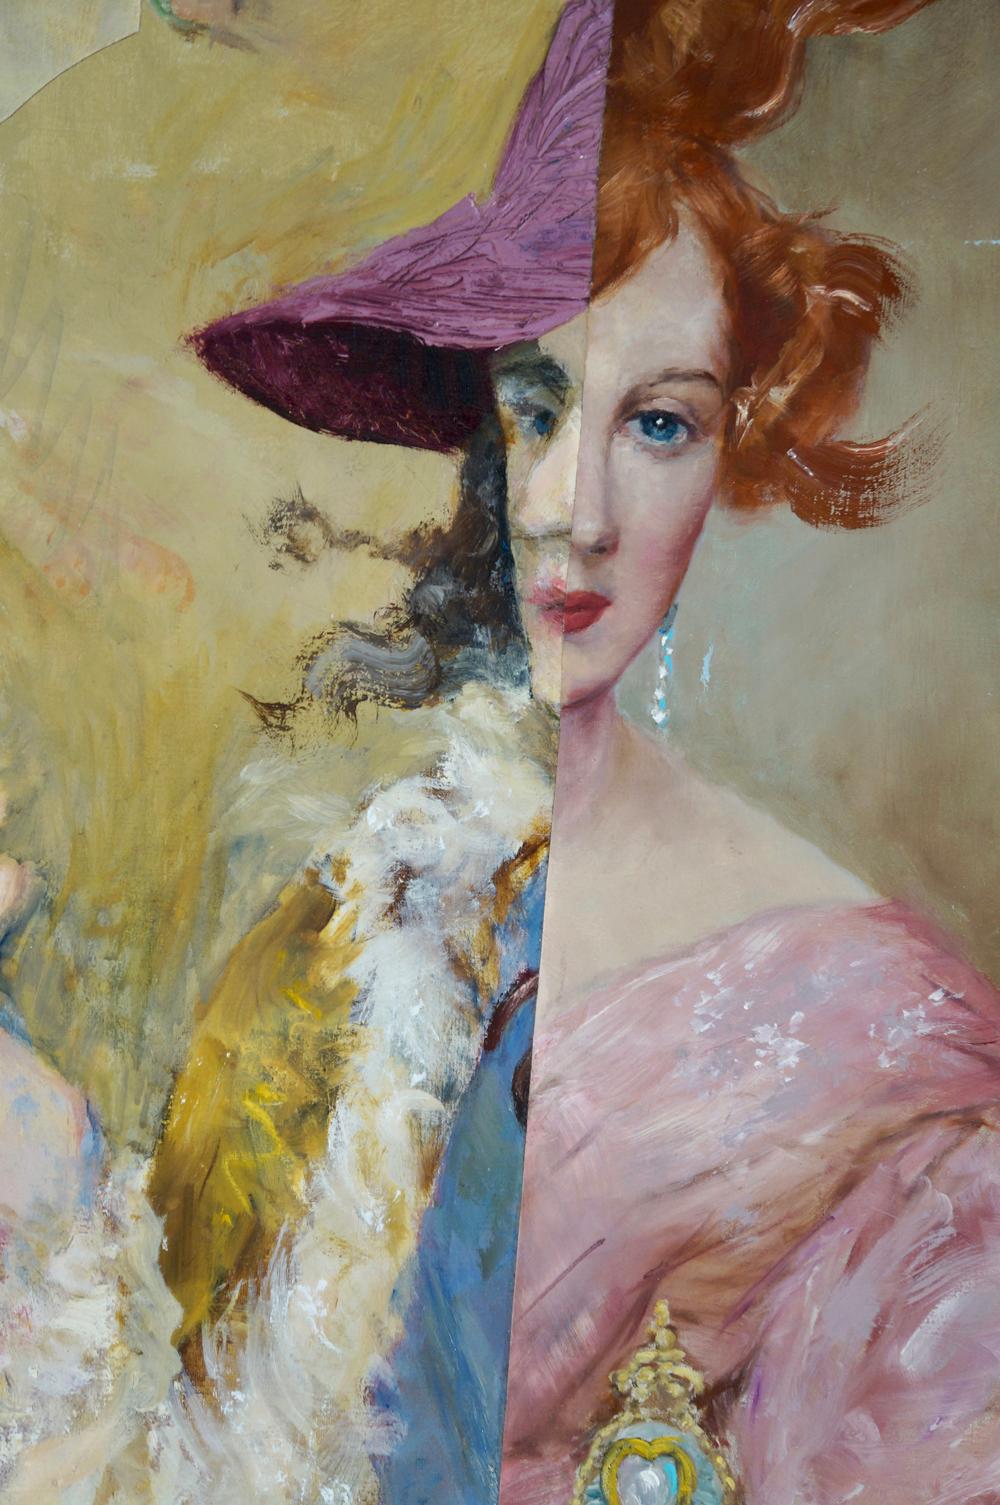 John Baker’s “Smoking Debutante”, an acrylic painting on canvas 40 x 29 x 1.5 inches, in dusty pinks with pale tans, yellows and off whites, is from the artist’s “Socialite” series. Extreme elegance and social poise on the one side and an almost